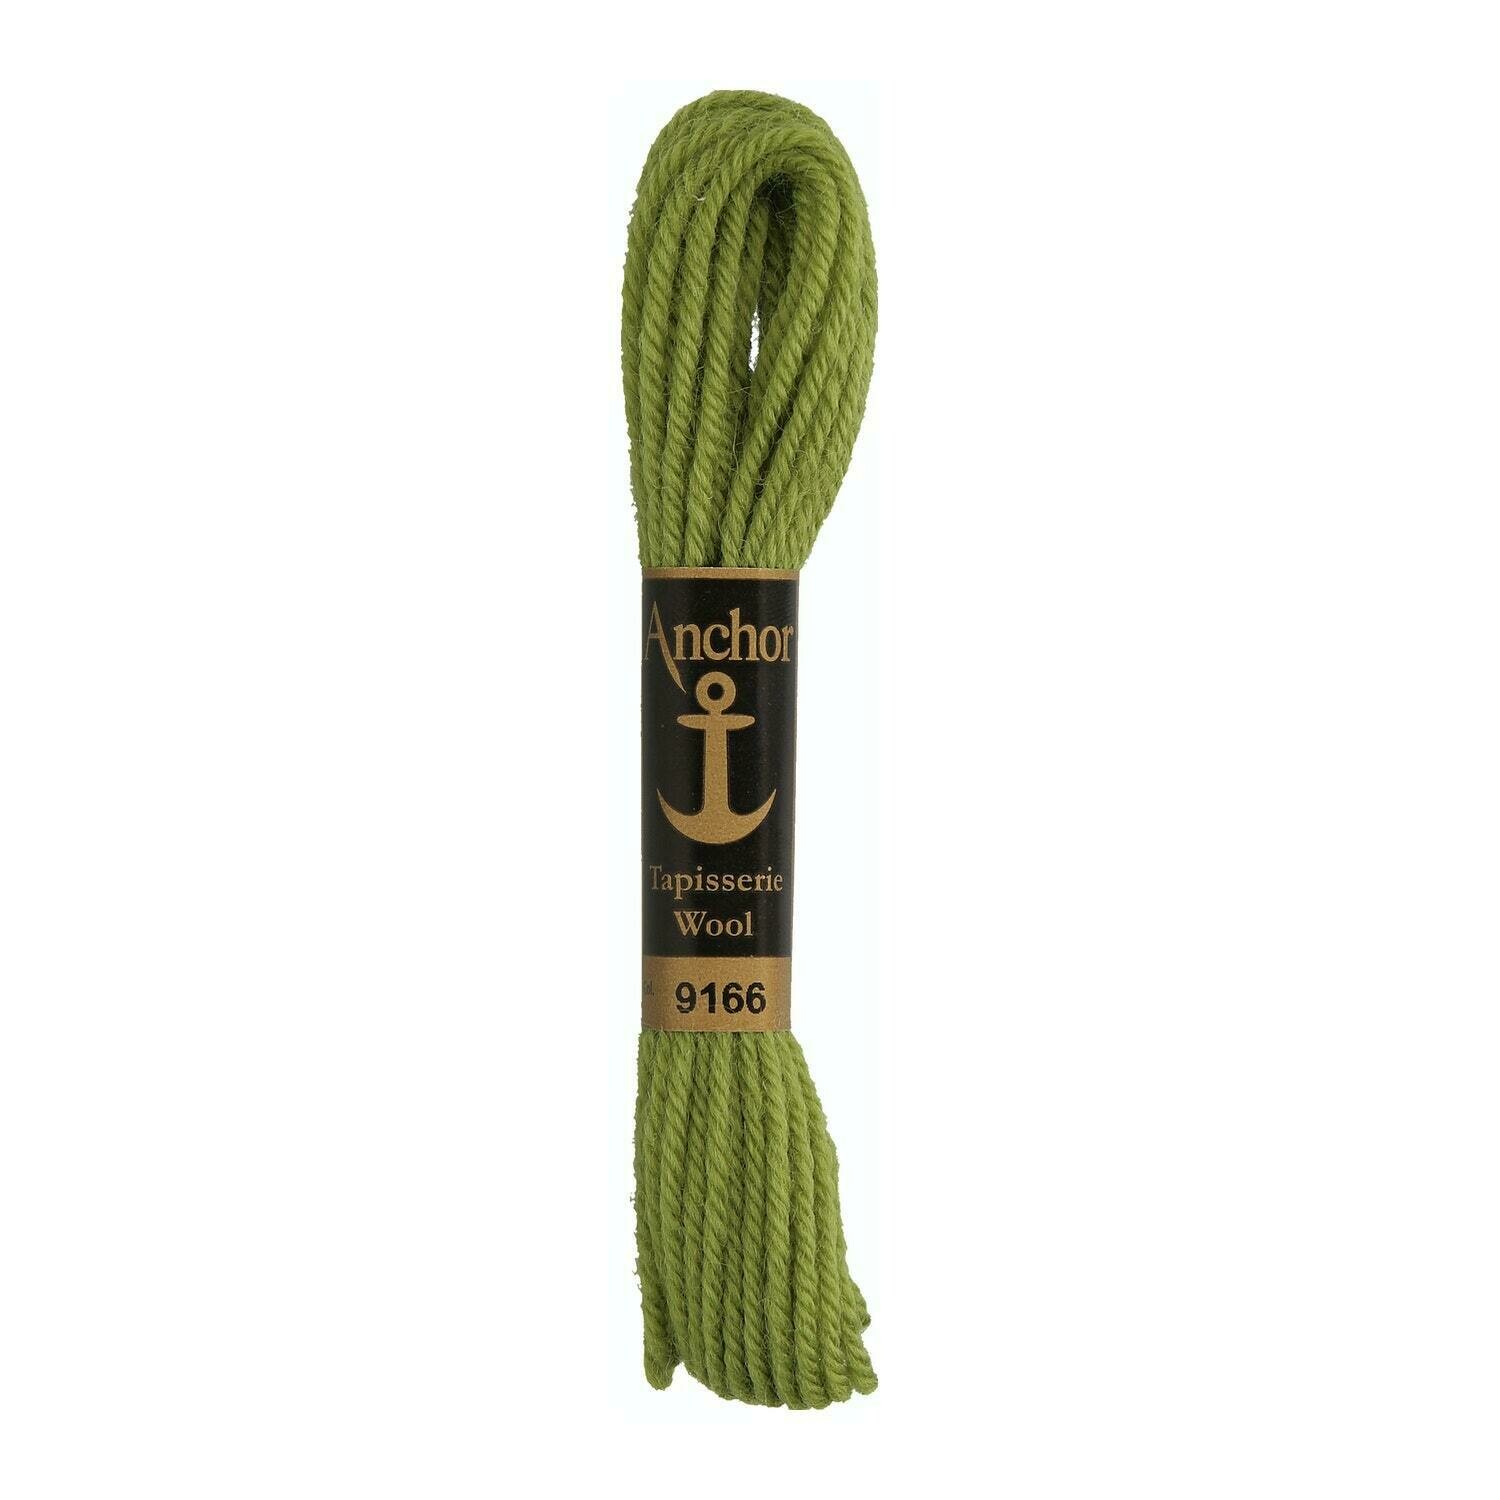 Anchor Tapisserie Wool #09166